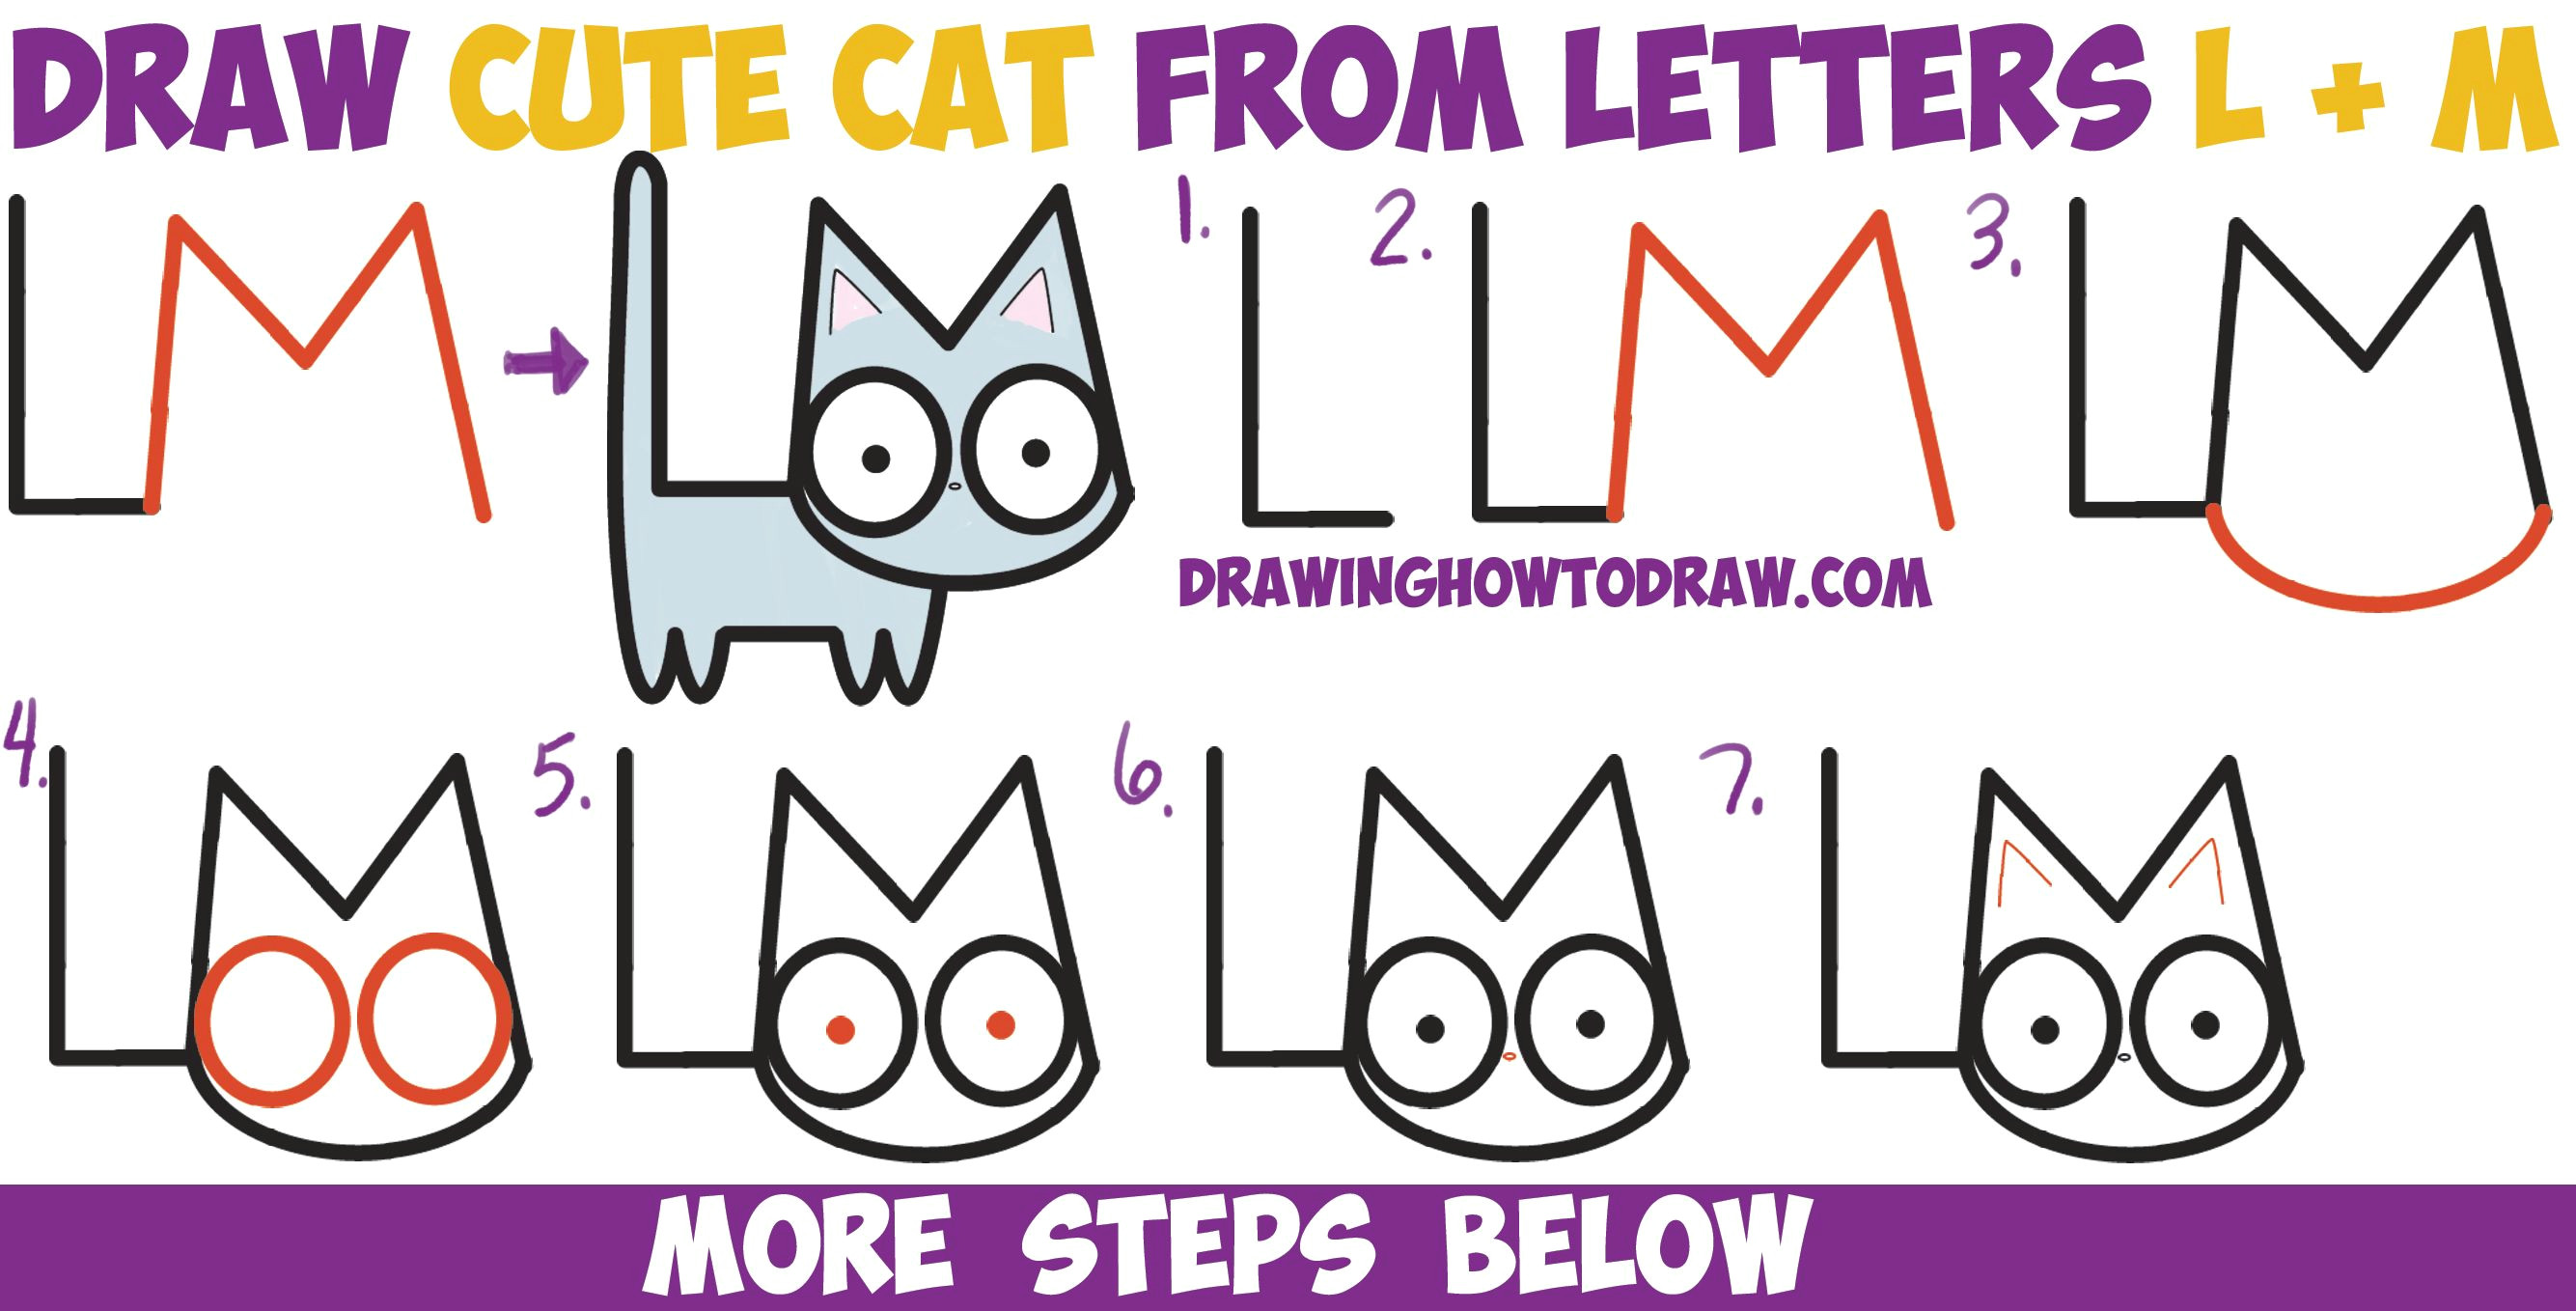 Easy Kitten Drawings How to Draw A Cute Cartoon Kitten From Letters L M Easy Step by